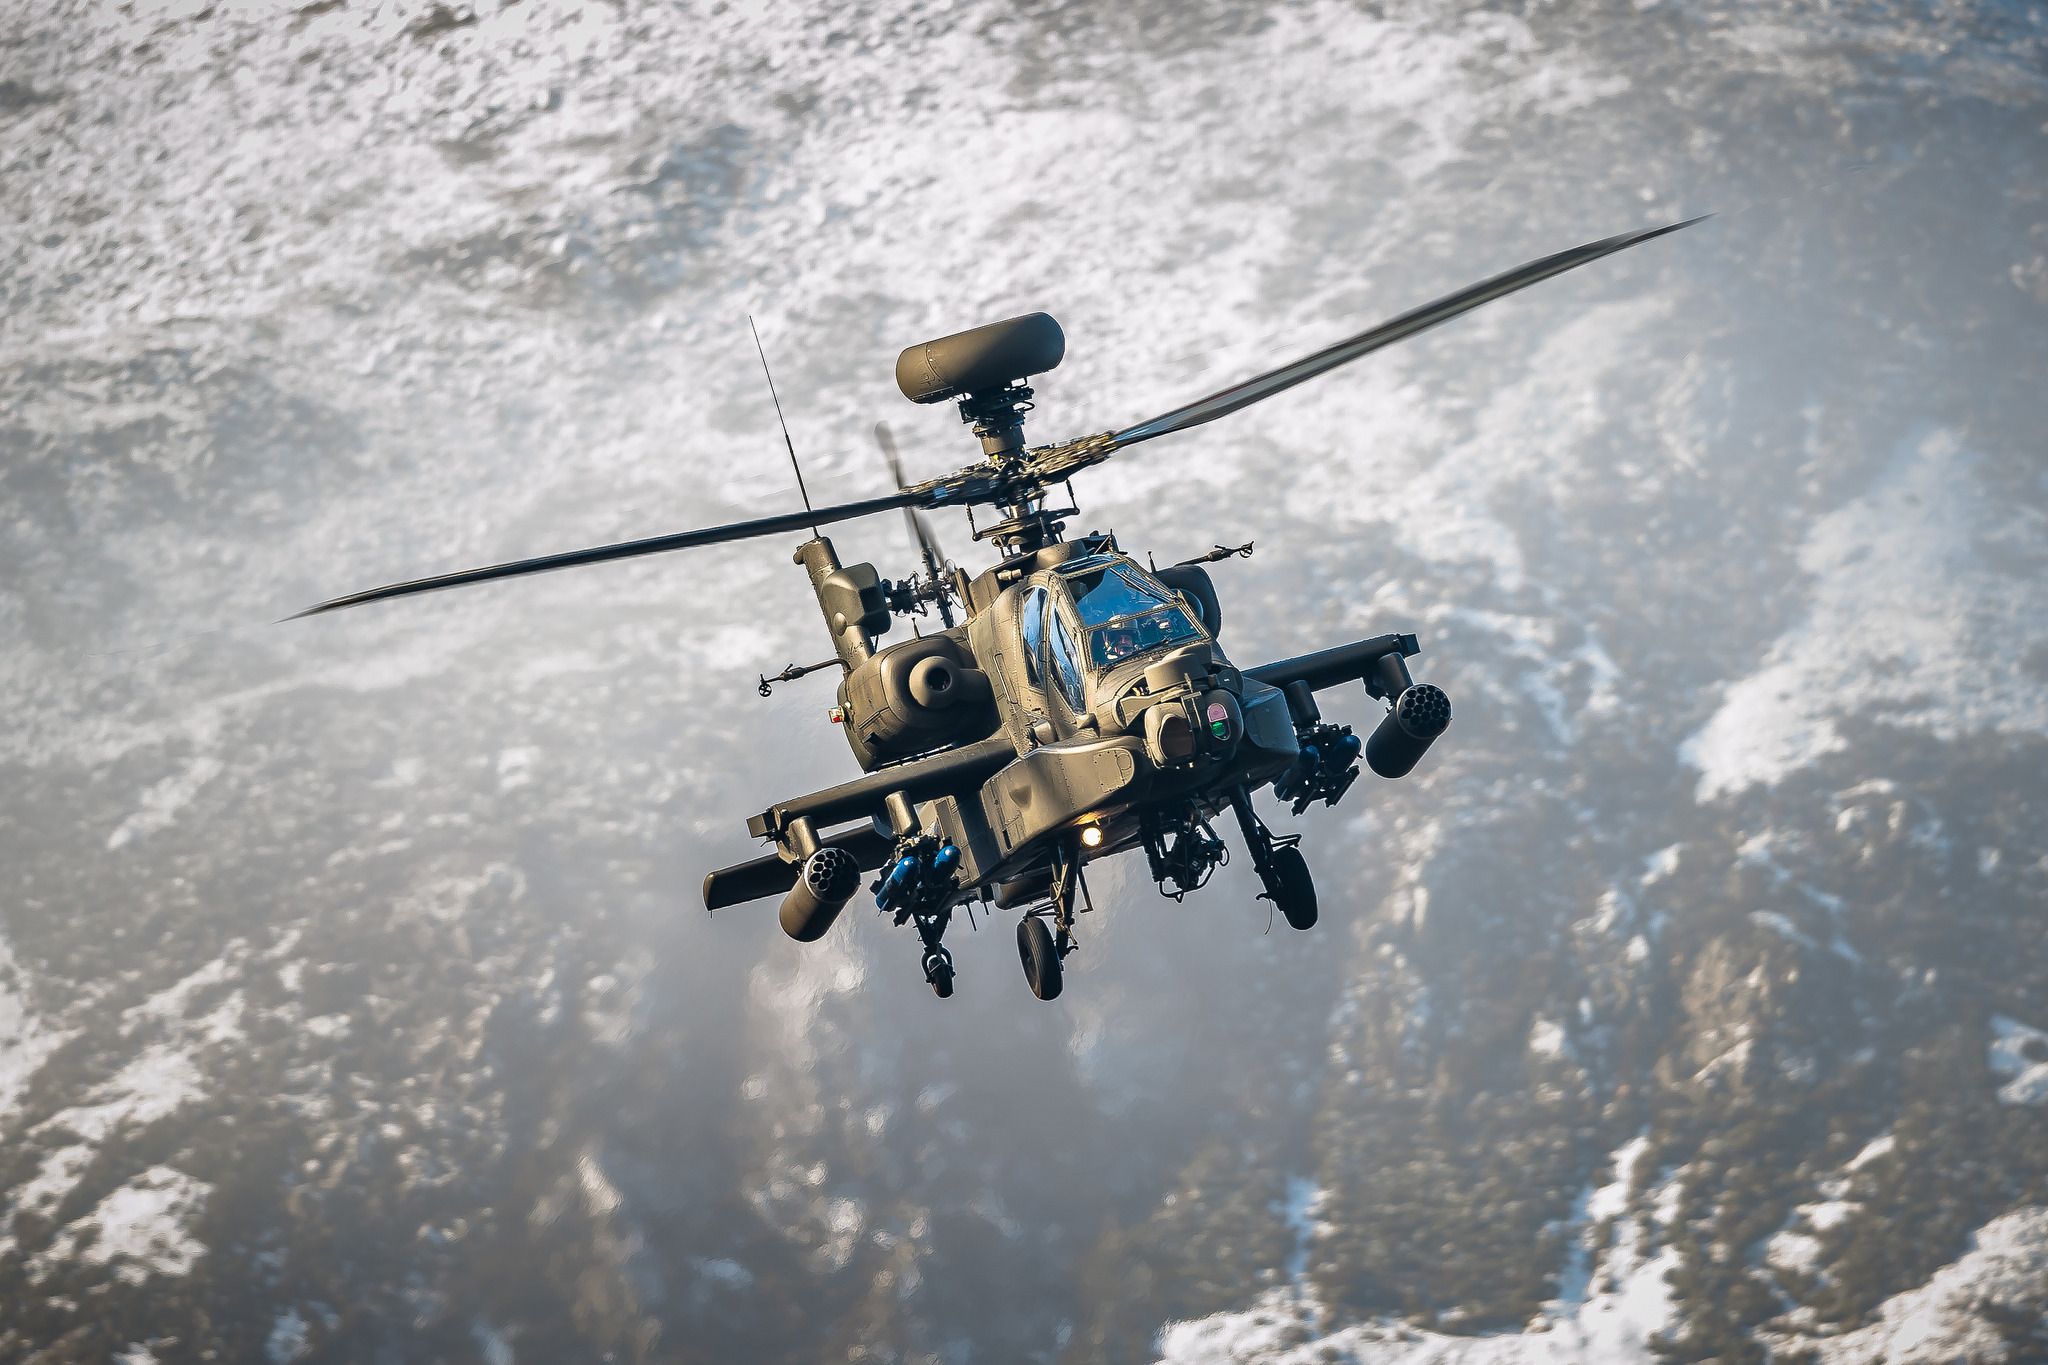 Free download Wallpaper ah 64 apache the apache drums helicopter wallpaper [2048x1365] for your Desktop, Mobile & Tablet. Explore AH 64 Apache Wallpaper. AH 64 Apache Wallpaper, AH 64 Apache Helicopter Wallpaper, AH 64 Wallpaper